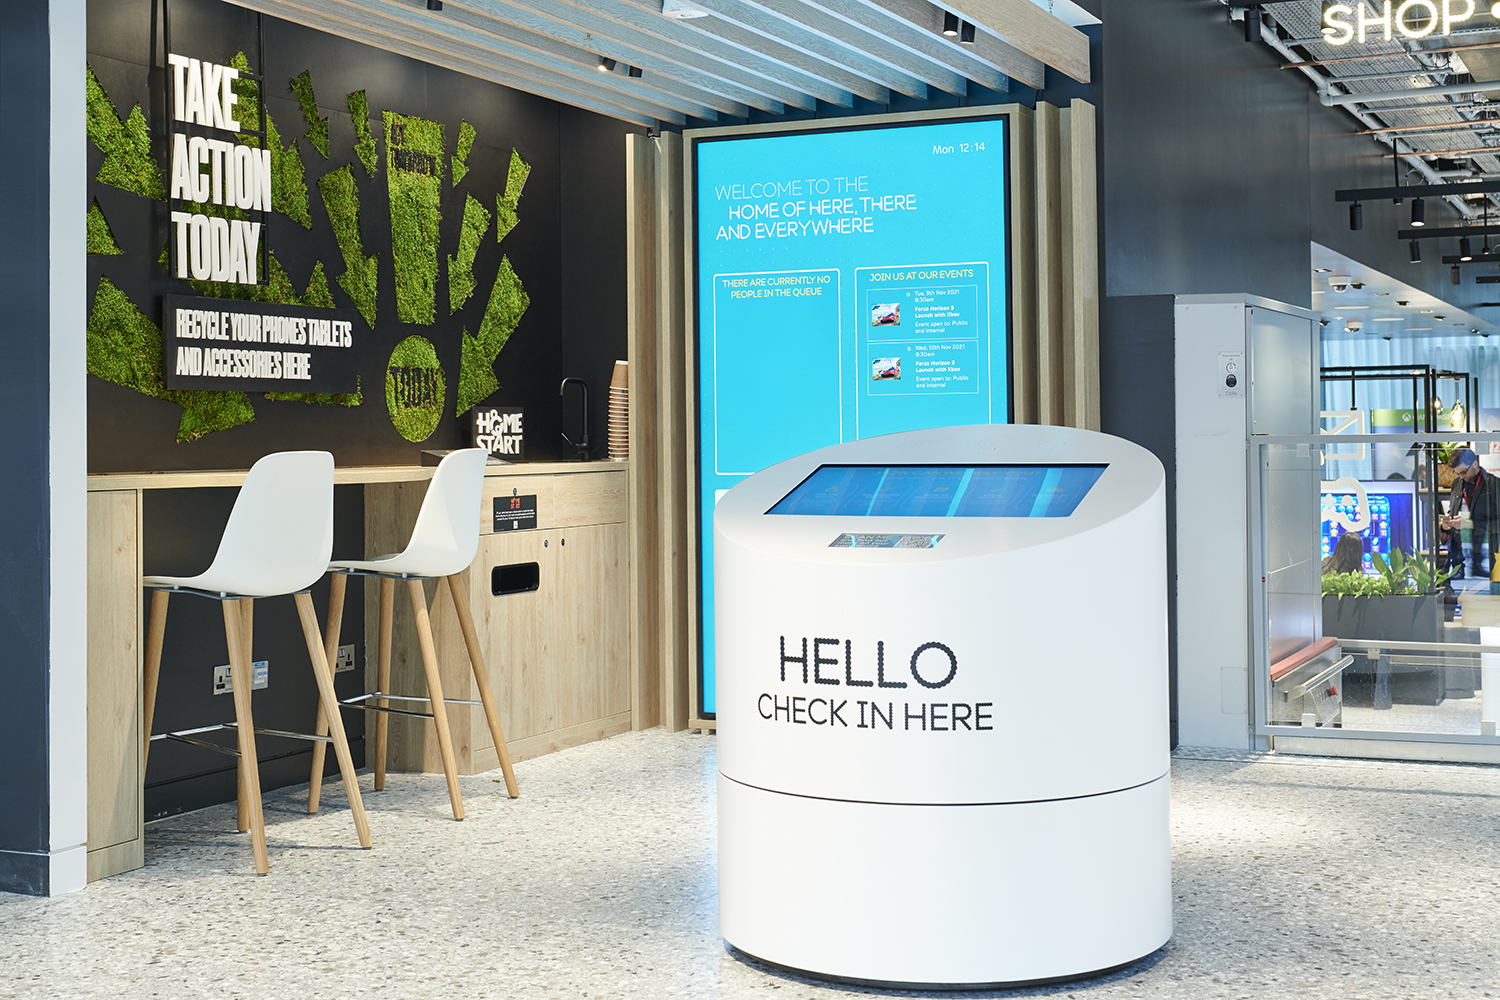 20 Inspiring New Retail Concepts (From the World’s Biggest Brands